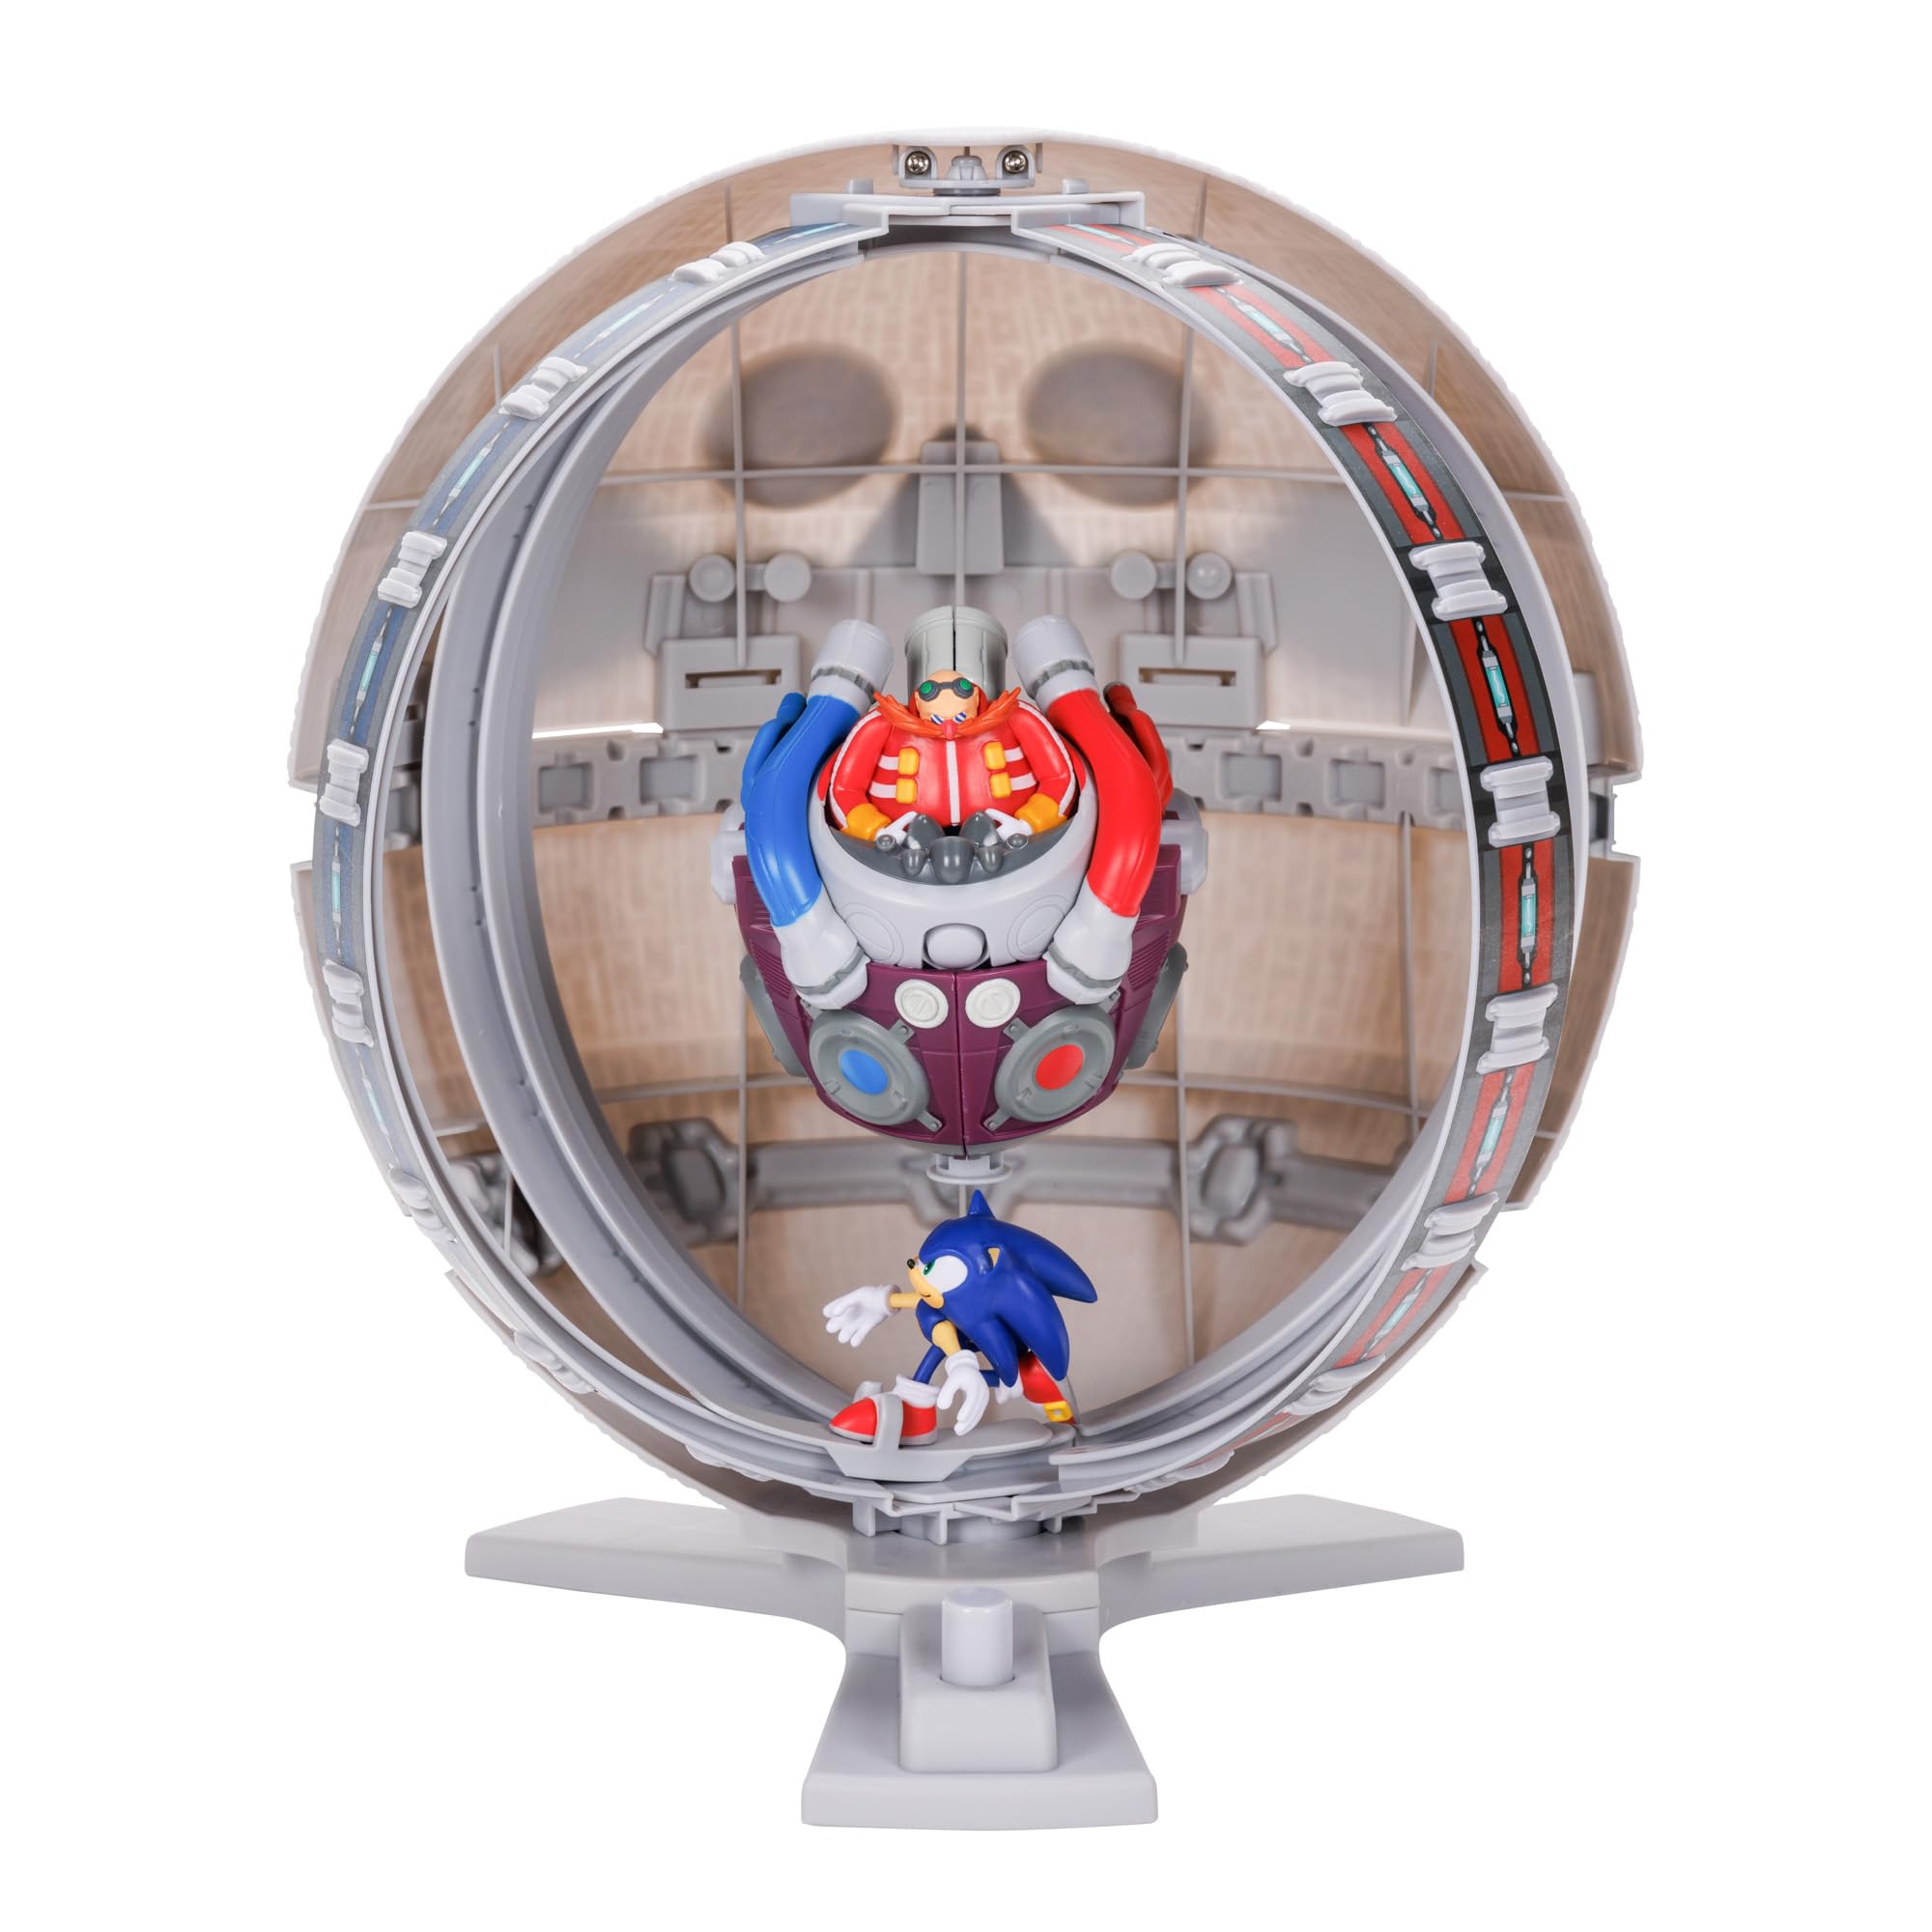 12" Sonic The Hedgehog Death Egg Playset w/ 2.5" Sonic Action Figure $11.70 + Free Shipping w/ Prime or on $35+